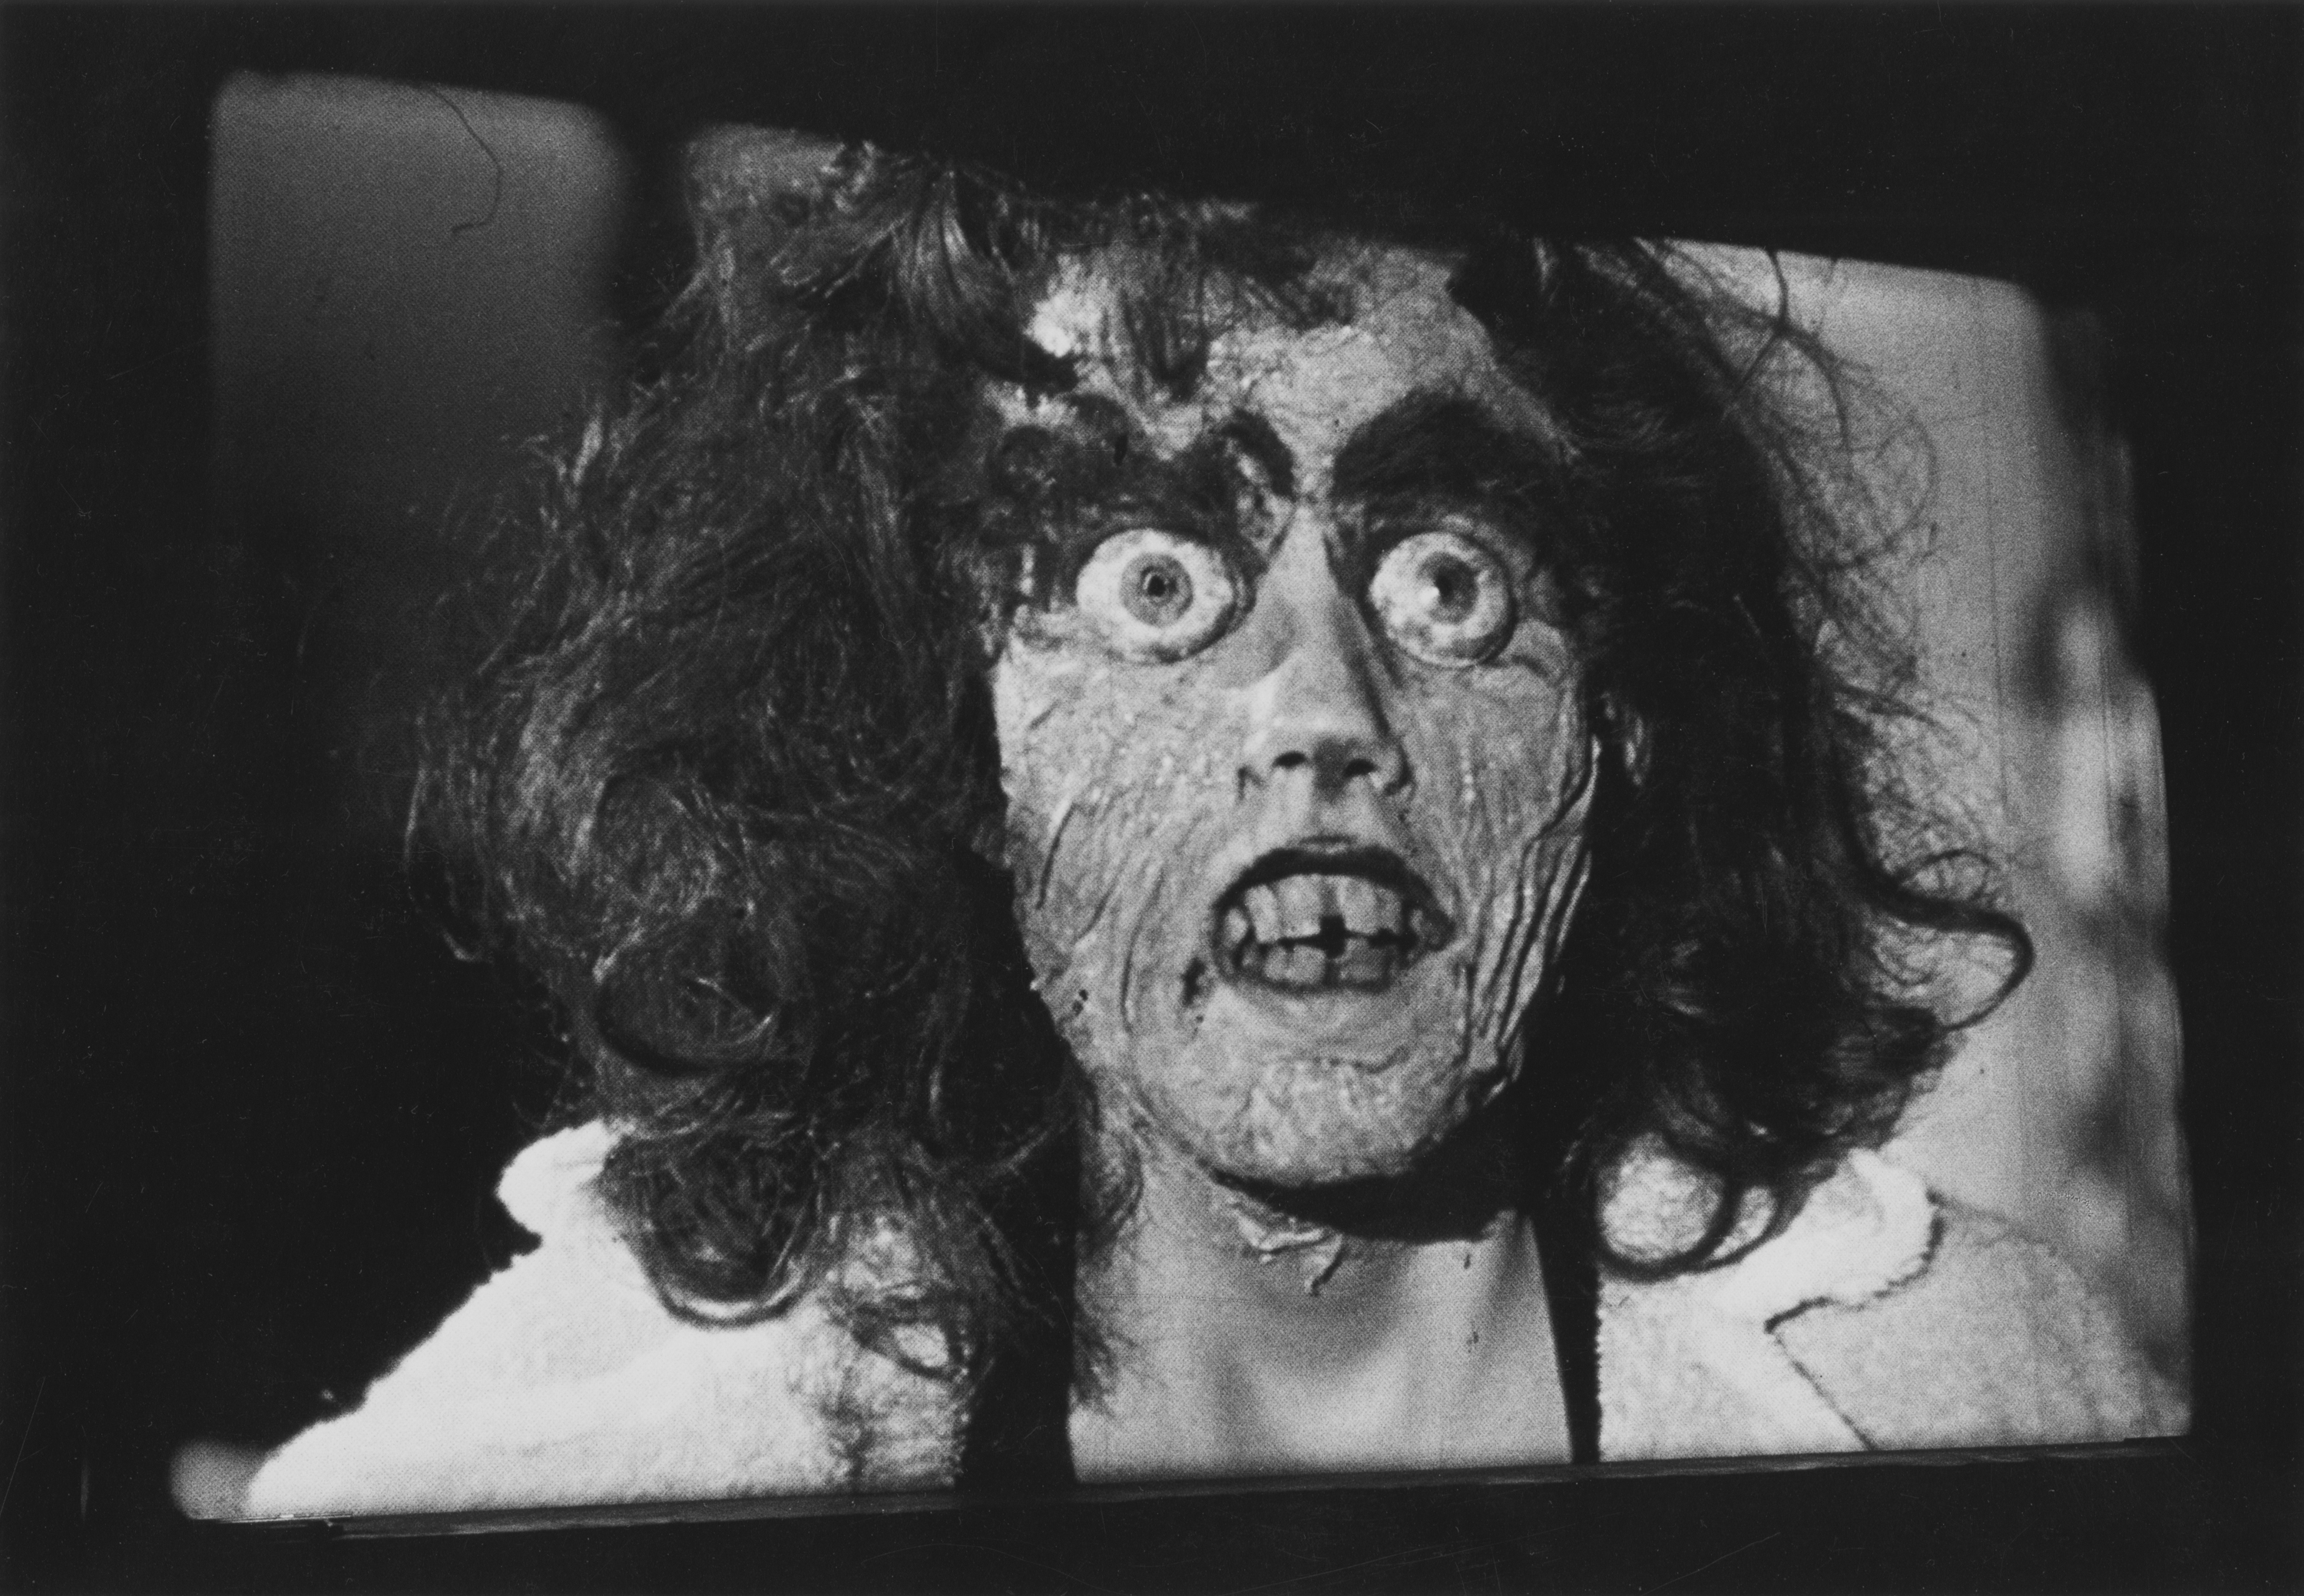 Black and white photograph of a monster appearing on a movie screen